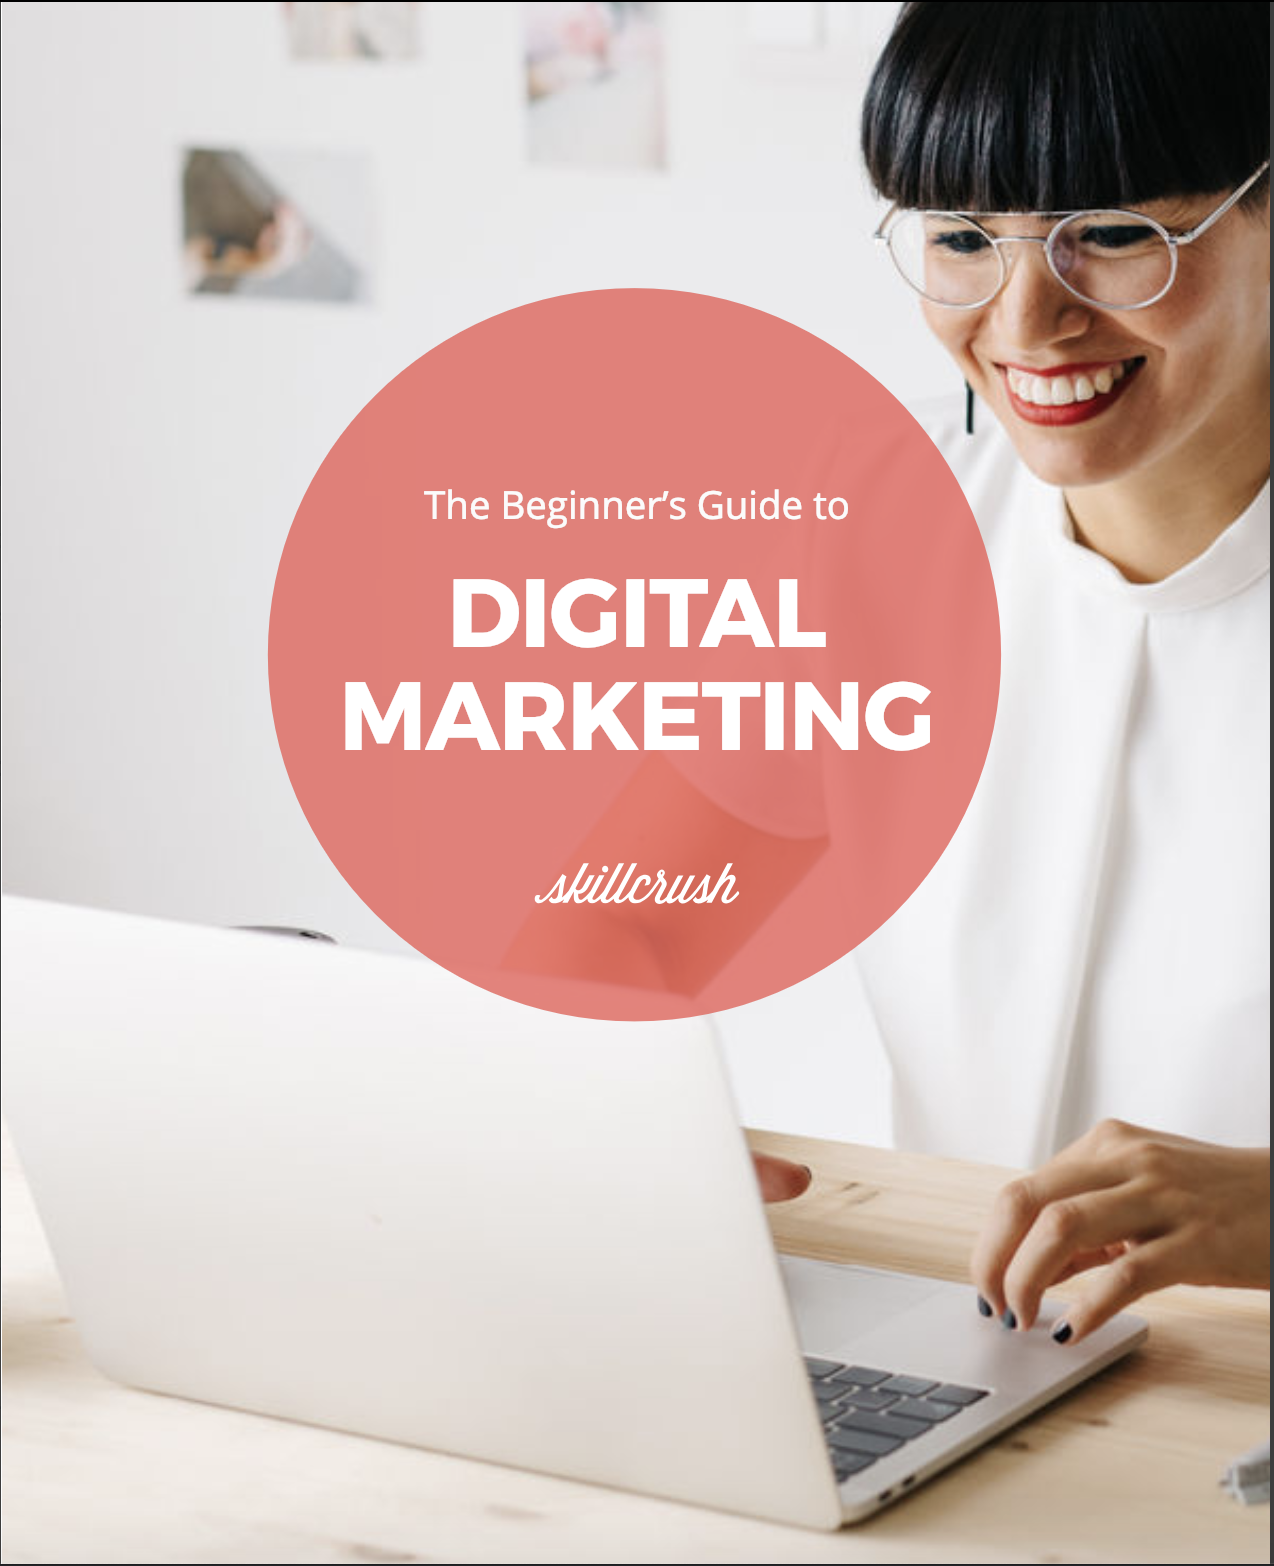 Get Our Free Beginner's Guide to Digital Marketing